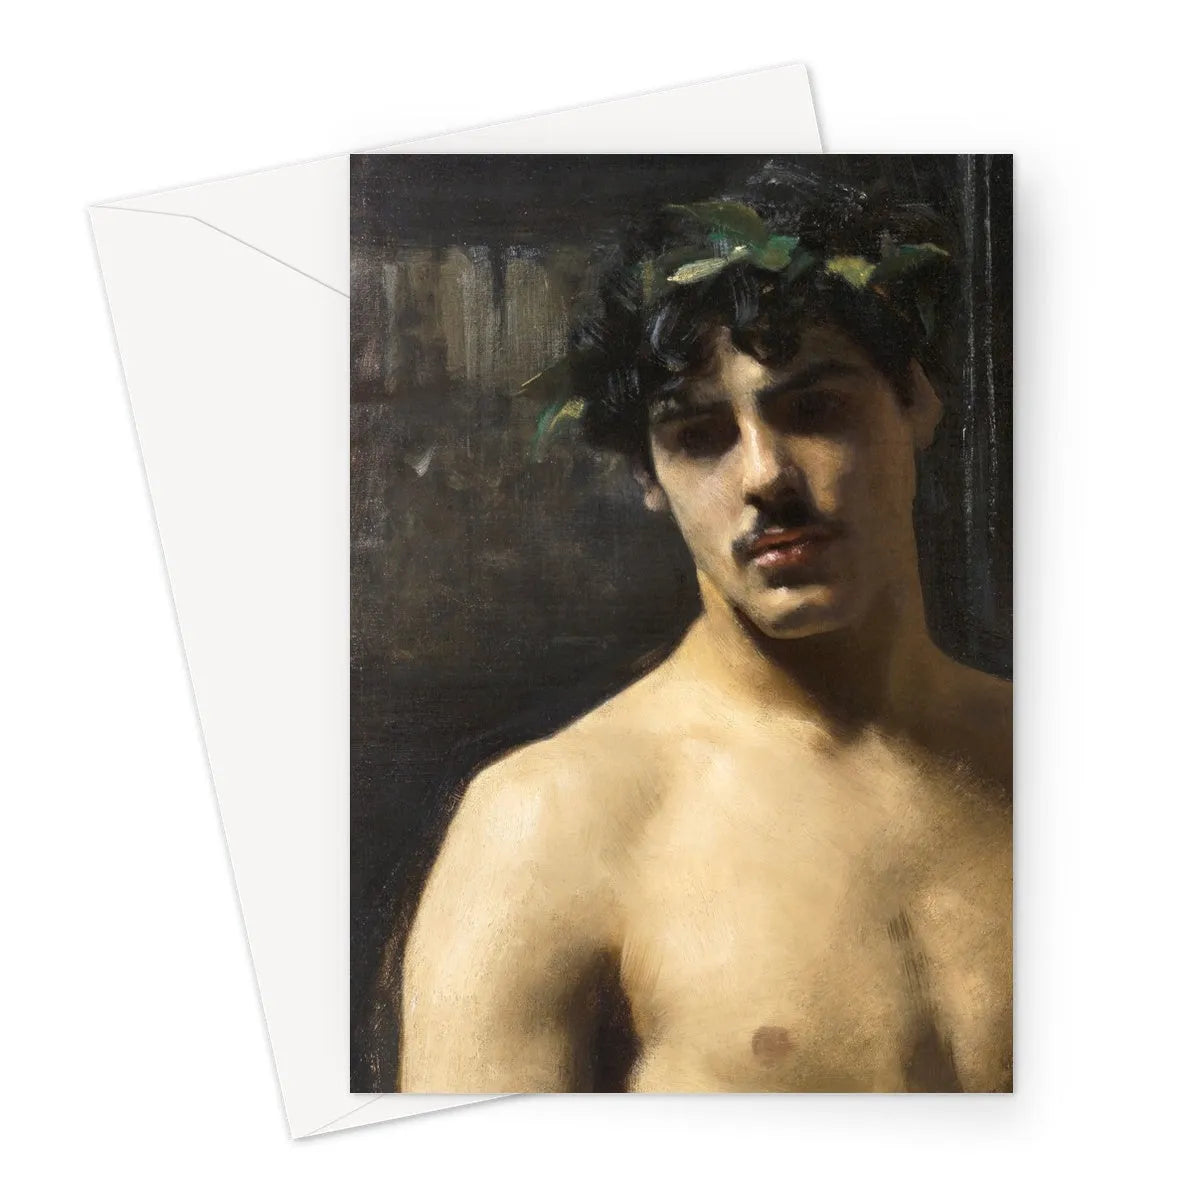 Man Wearing Laurels By John Singer Sargent Greeting Card - A5 Portrait / 1 Card - Greeting & Note Cards - Aesthetic Art